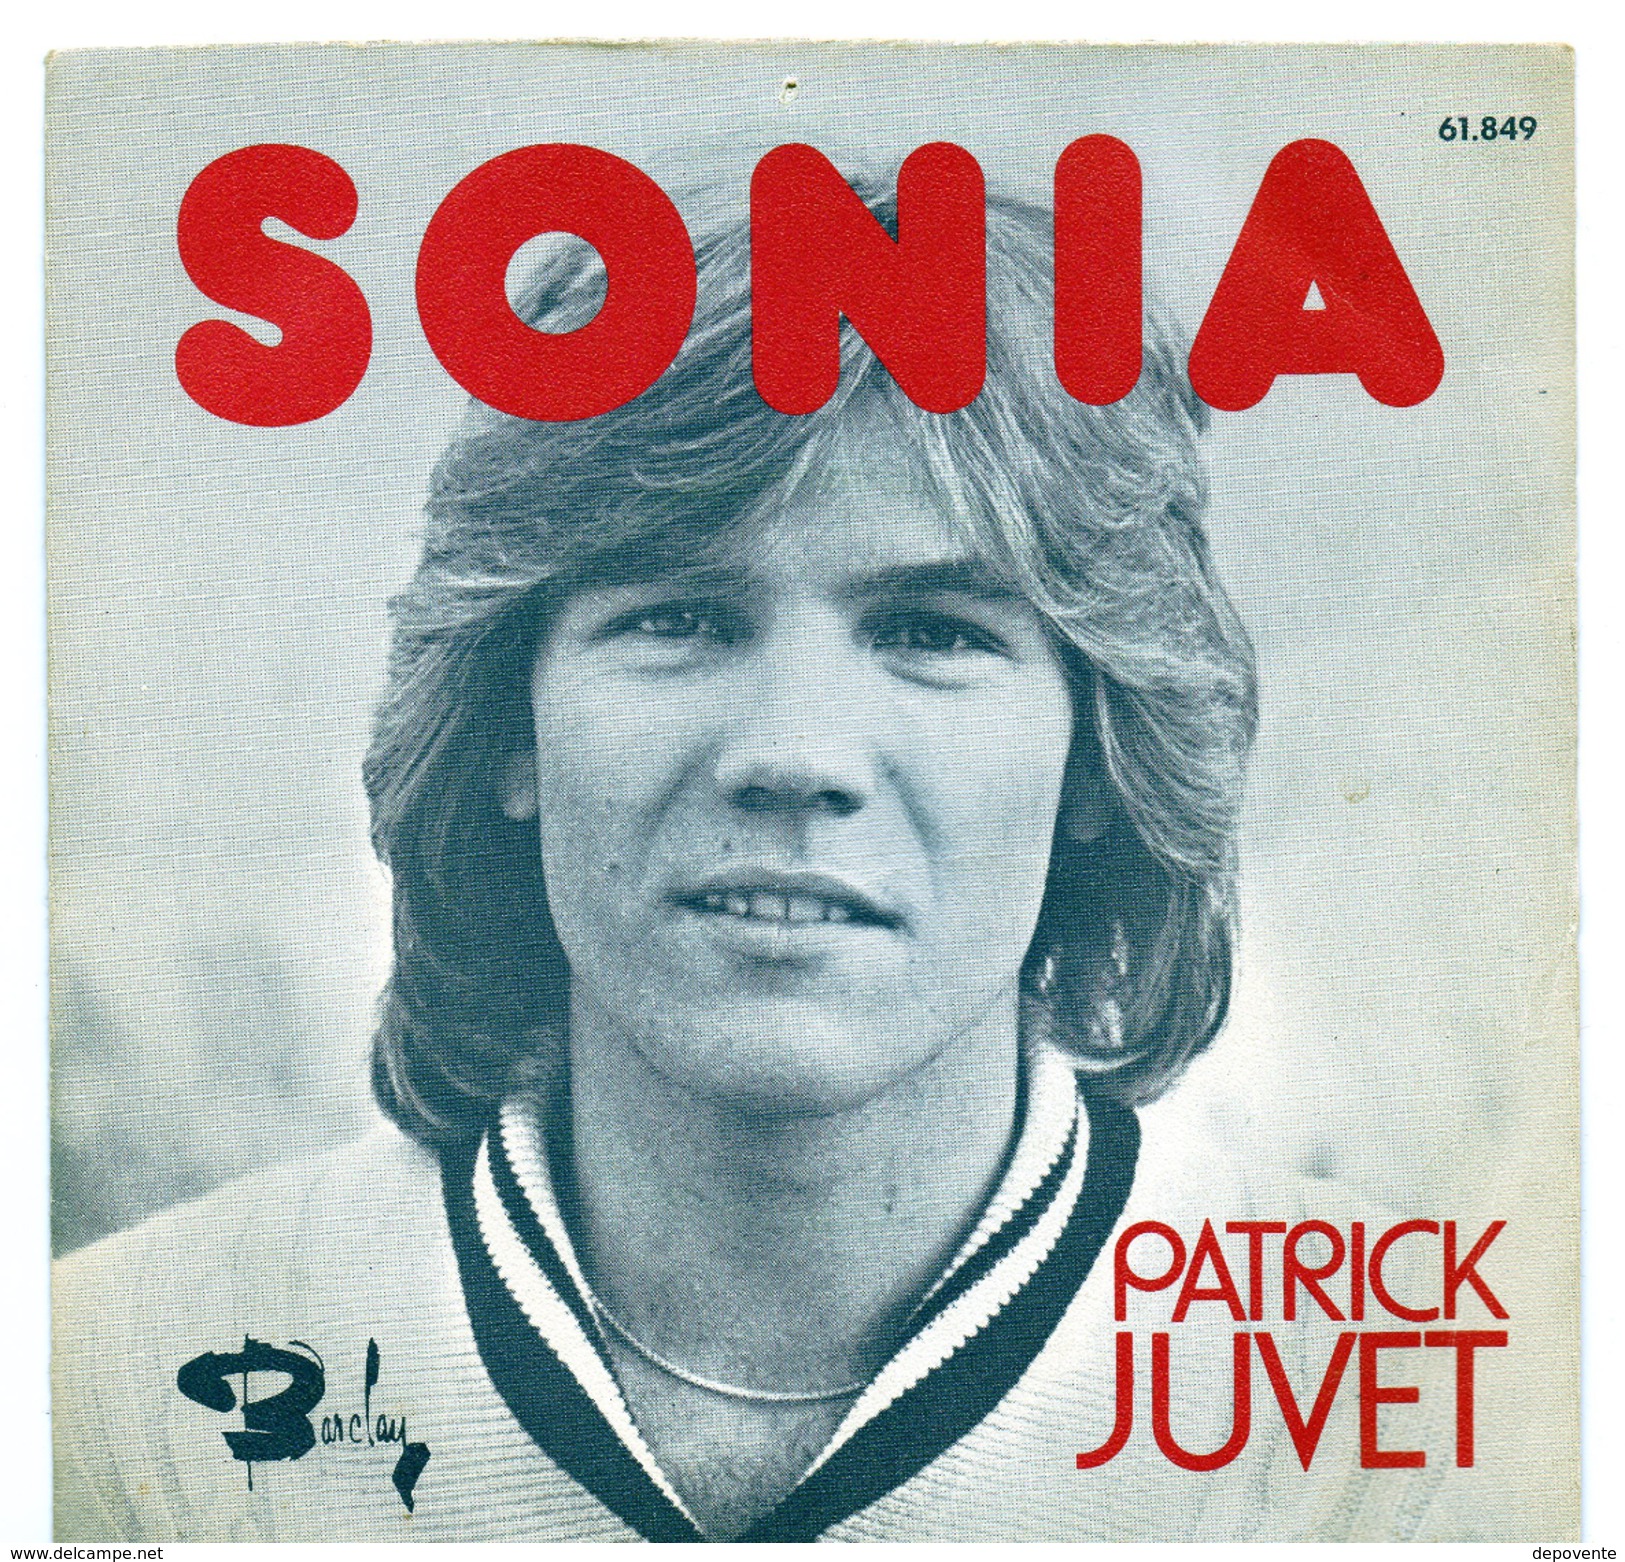 45T : PATRICK JUVET - SONIA / I WILL BE IN L.A. - Disco, Pop